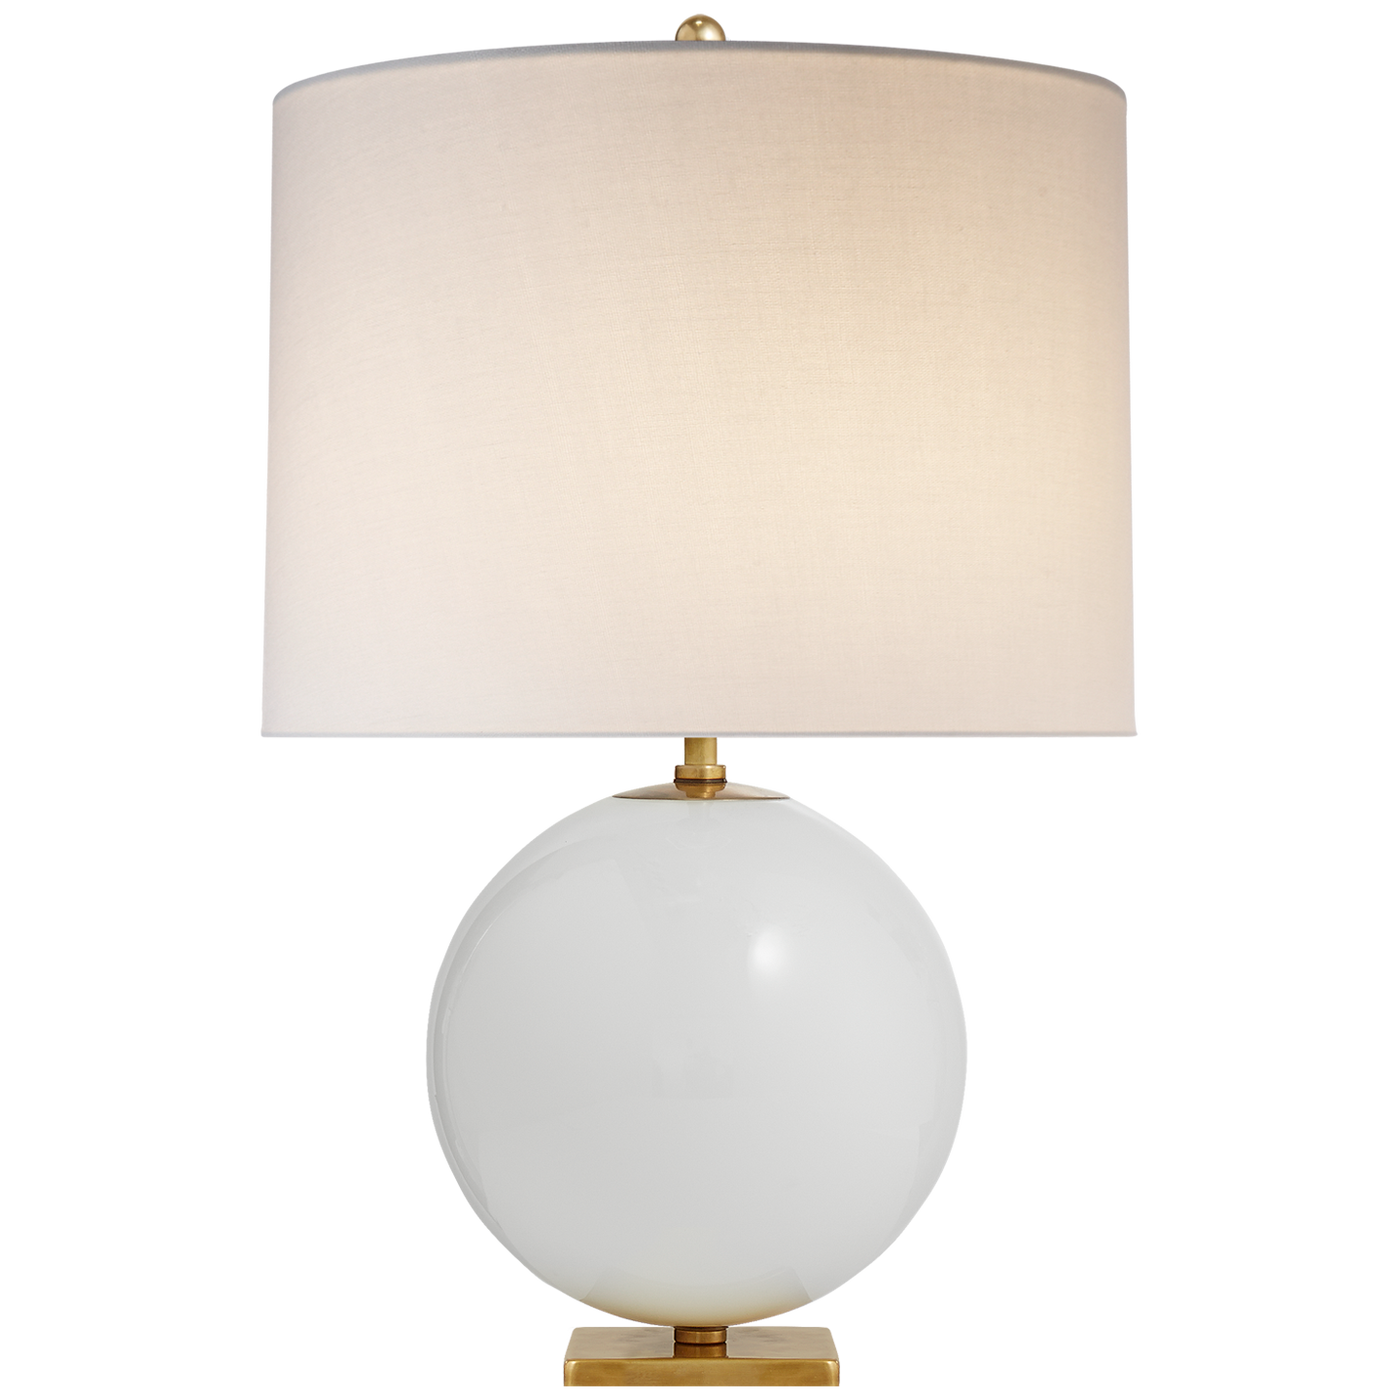 TABLE LAMP PAINTED GLASS (Available in 2 Finishes)